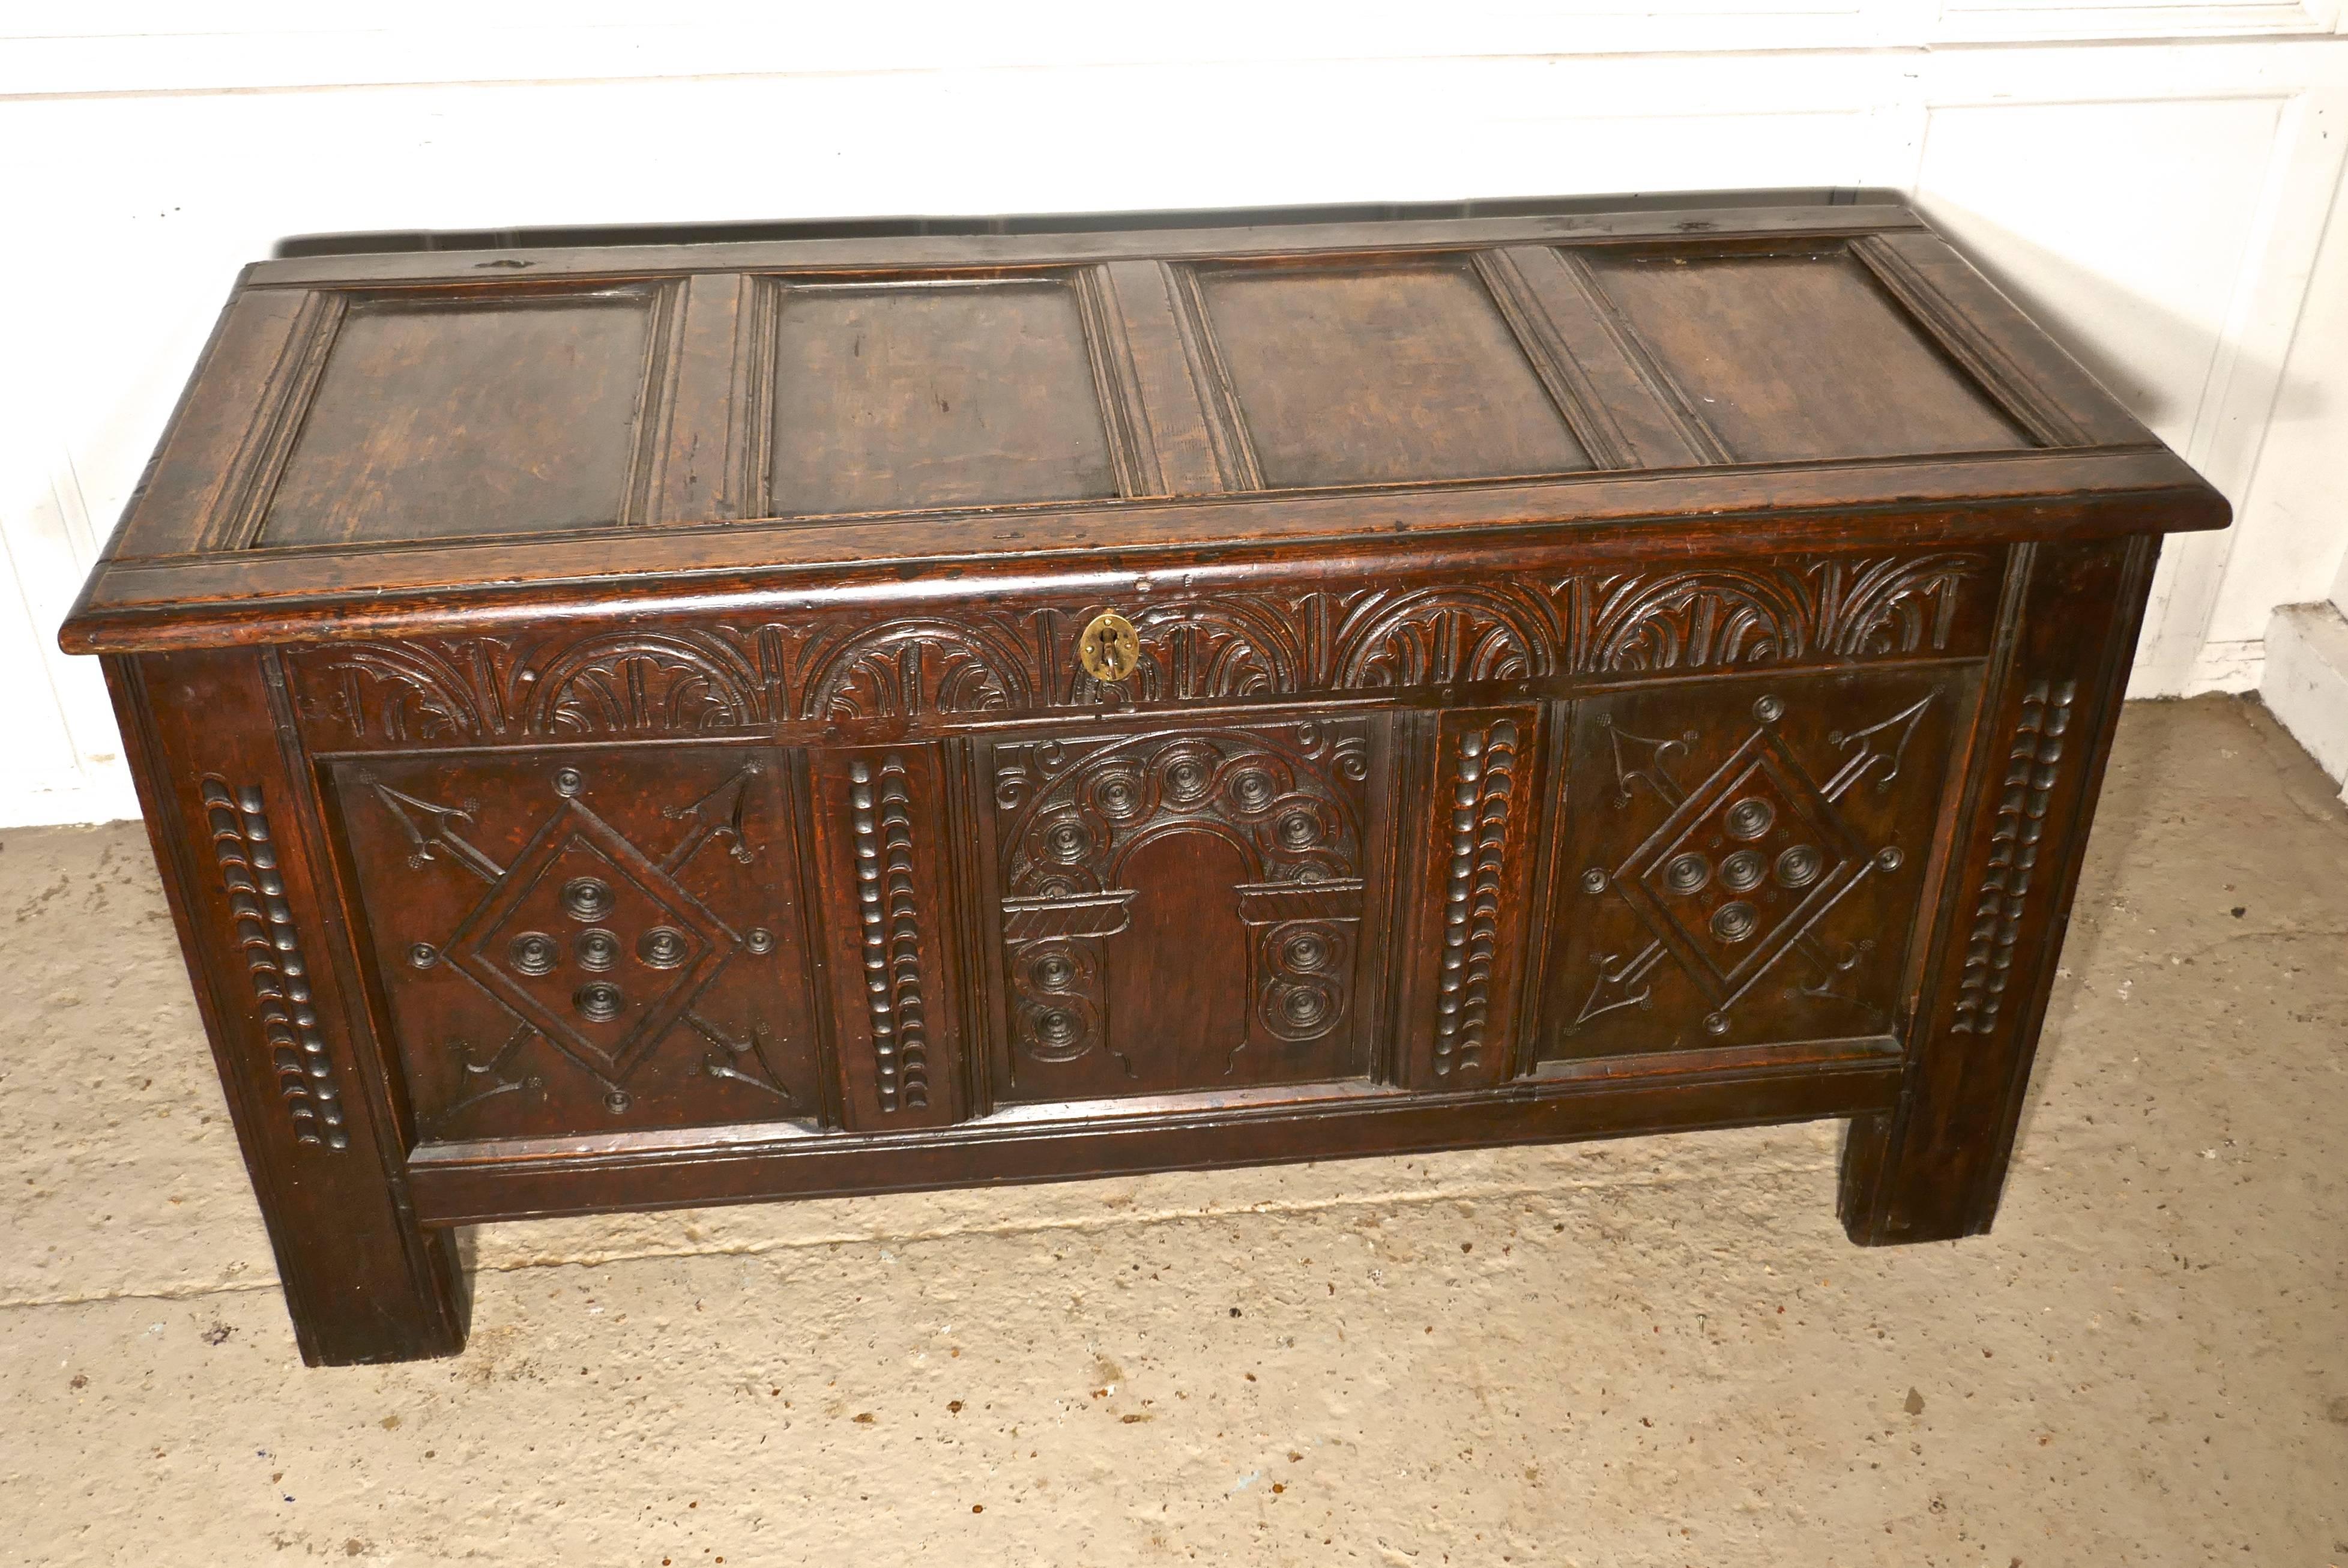 17th century carved oak coffer

This is a lovely old piece, with a superb patina, the chest has three beautifully carved panels and frieze on the front at the top. It has a key, working lock and a brass escutcheon, these are not original but they